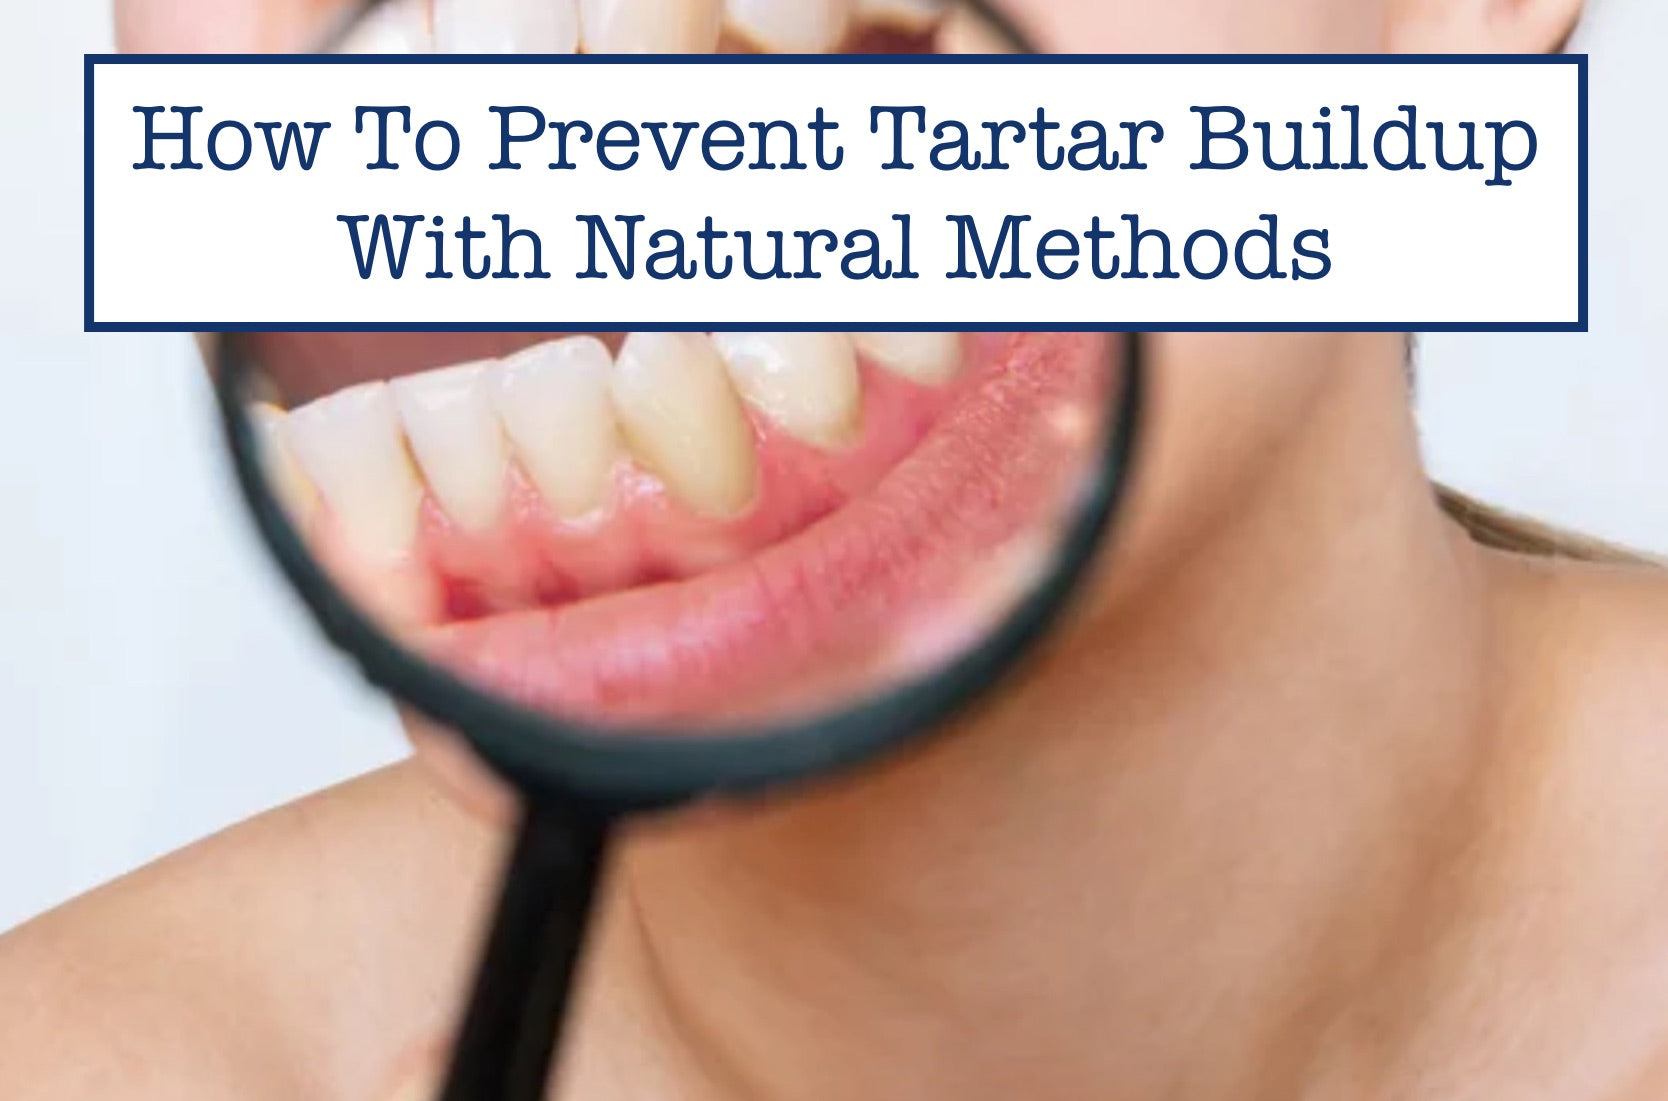 How To Prevent Tartar Buildup With Natural Methods